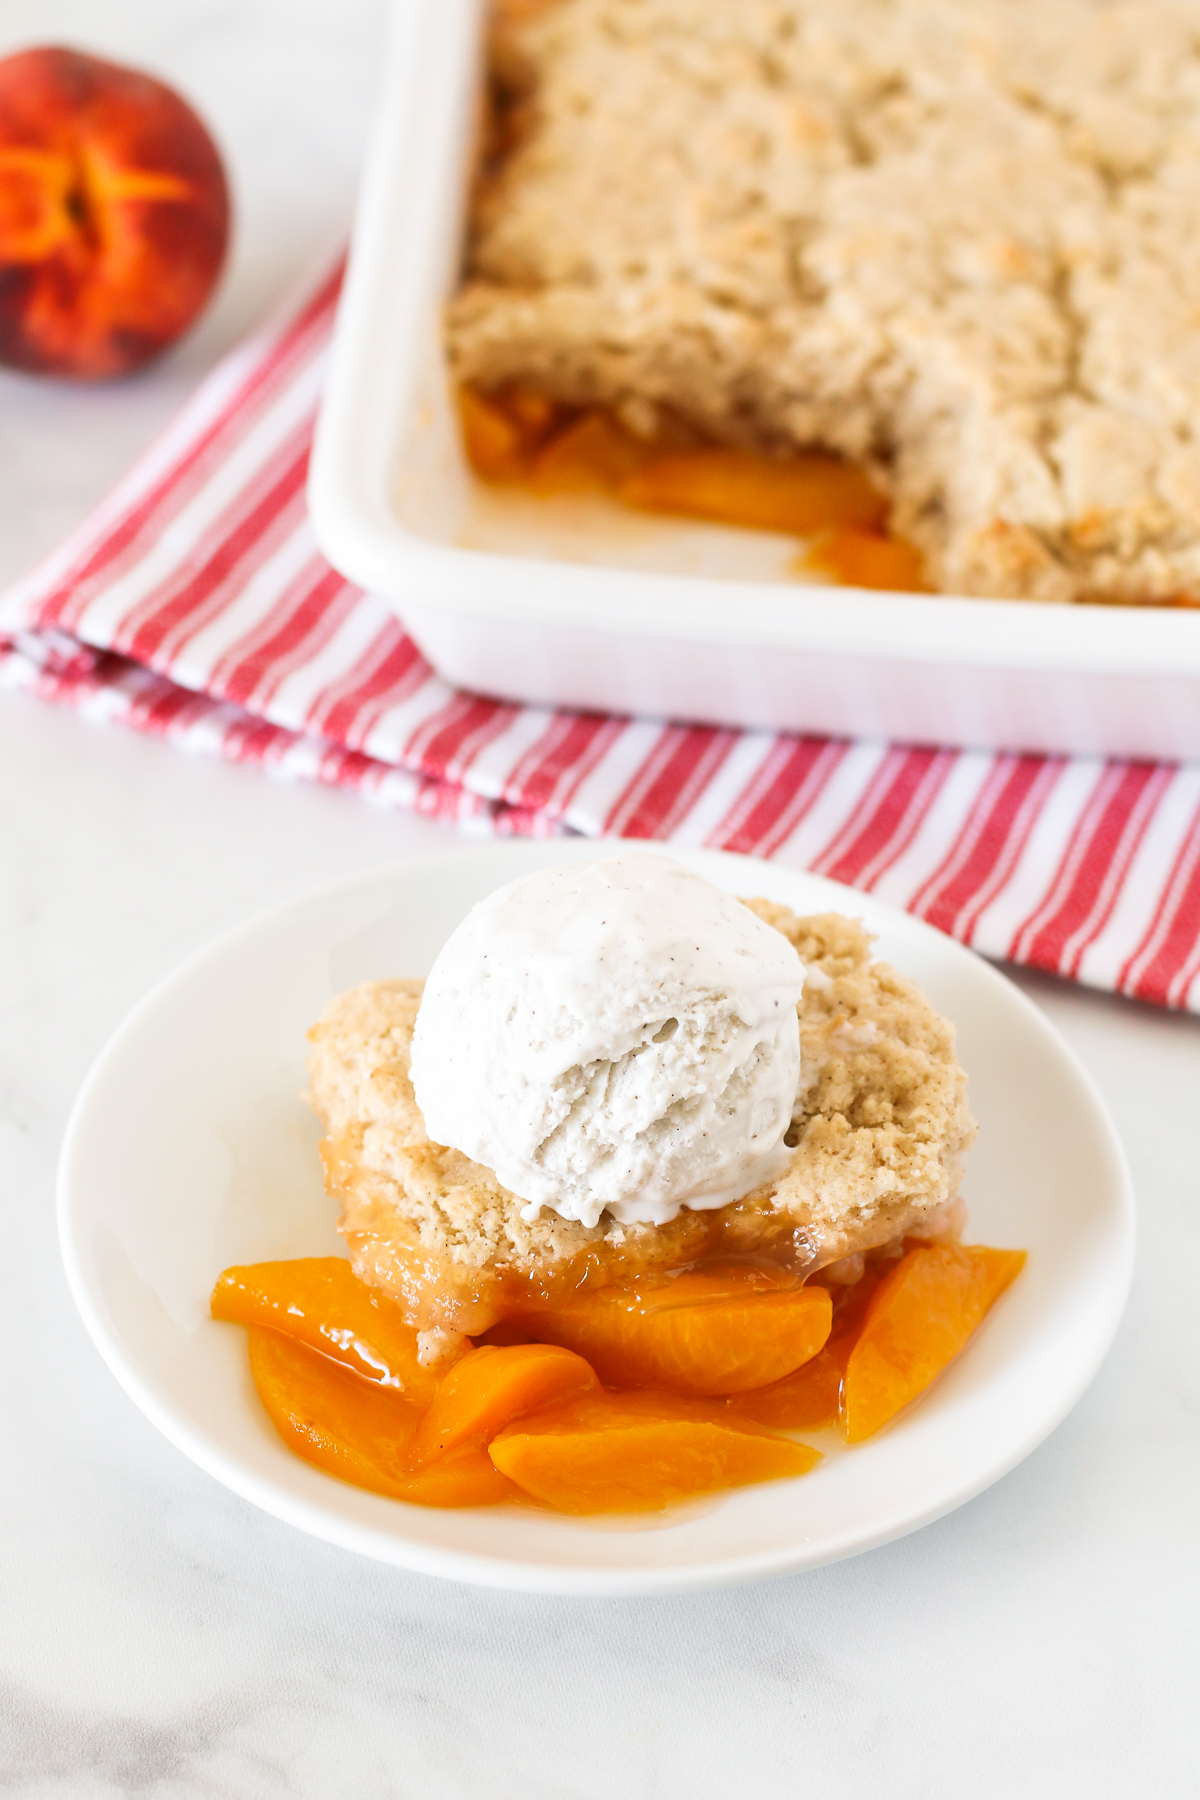 Gluten Free Vegan Peach Cobbler. Perfectly golden biscuit-like topping over sweet, juicy fresh peaches. The BEST summertime dessert!